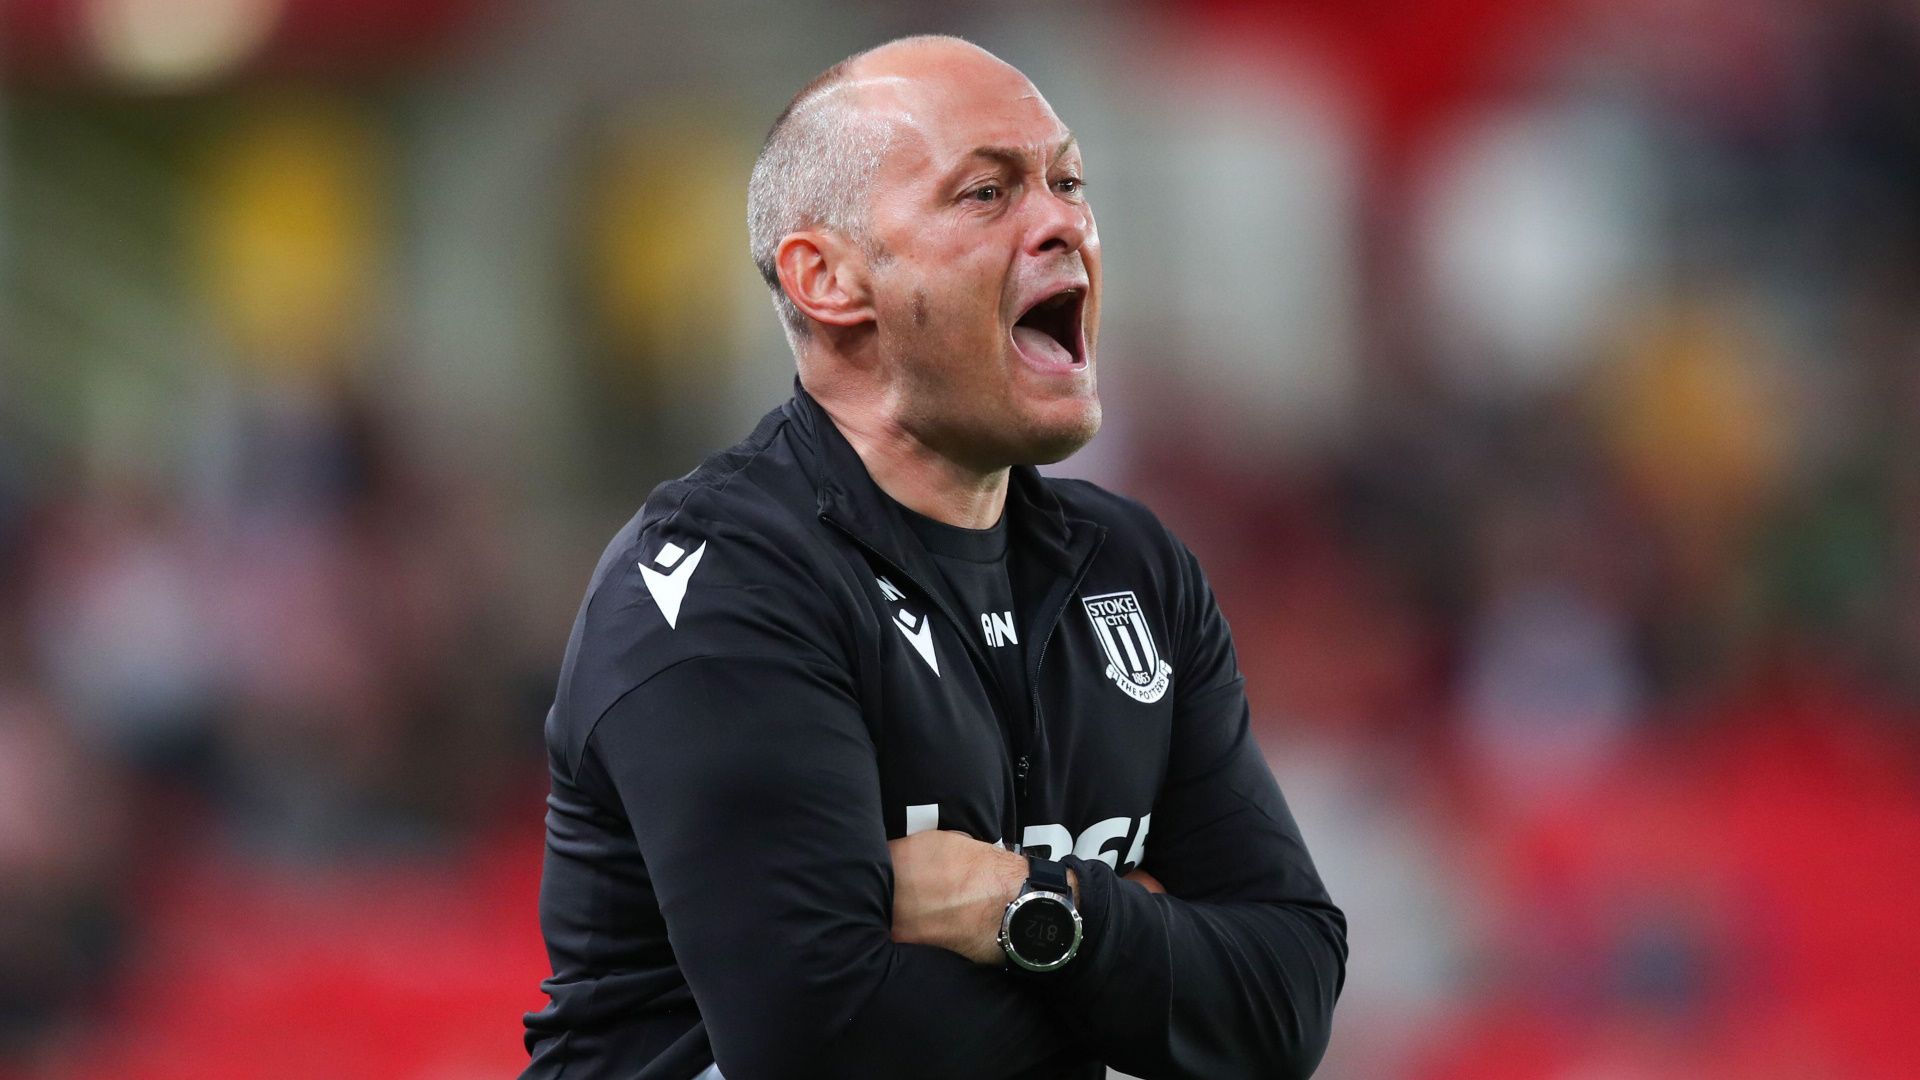 Stoke City vs West Brom player ratings as Andre Vidigal makes game